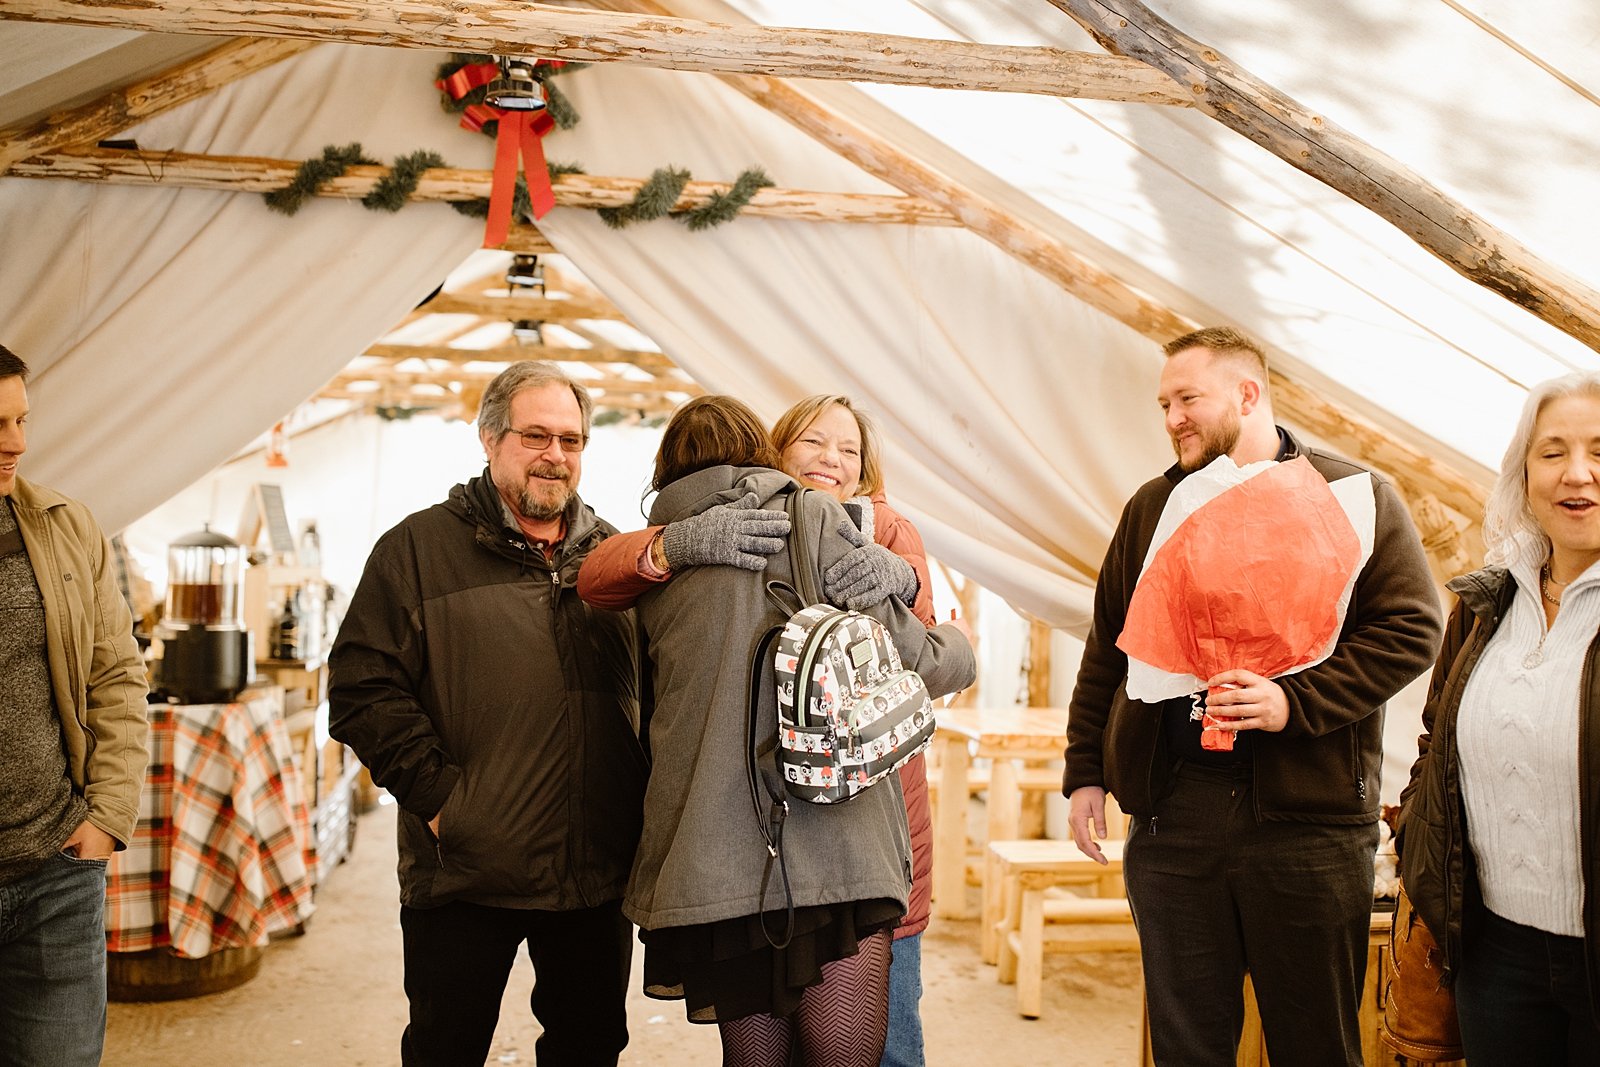 family celebrating couples proposal, proposal celebration,  canvas tent engagement, canvas snow tent, winter canvas tent, wintery engagement celebration, canvas tent with wood burning stove